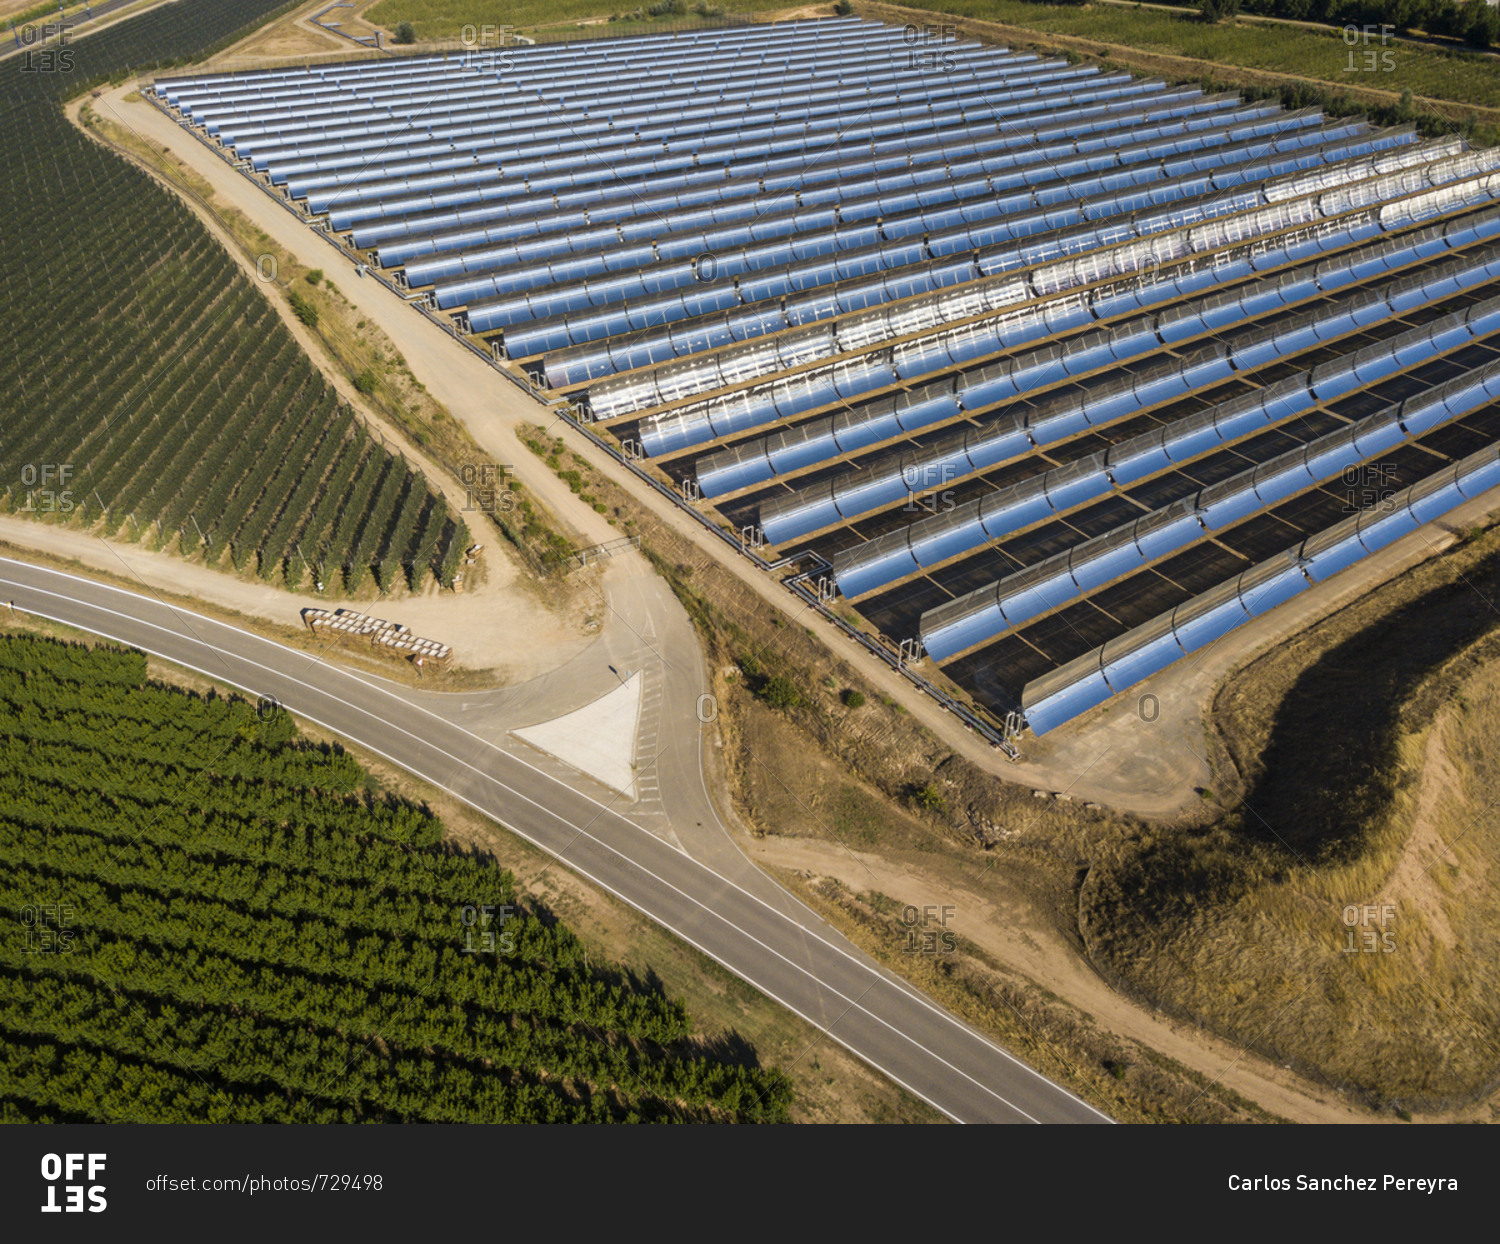 Aerial view of a field of solar cells located in Spain